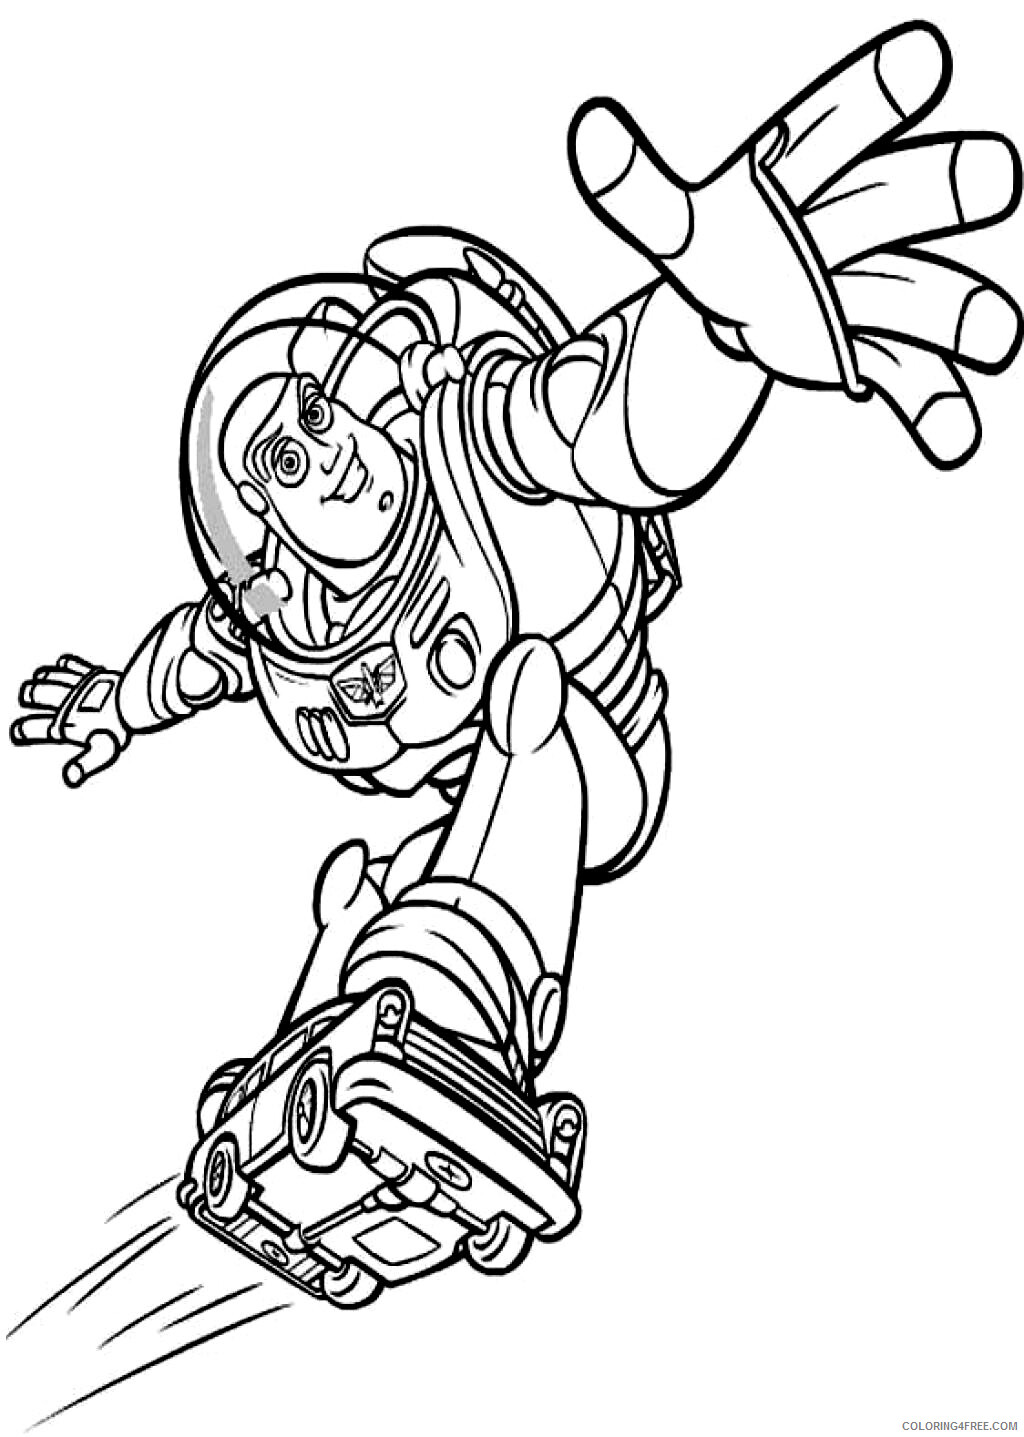 Buzz Lightyear Coloring Pages TV Film Buzz Lightyear Print Printable 2020 01748 Coloring4free